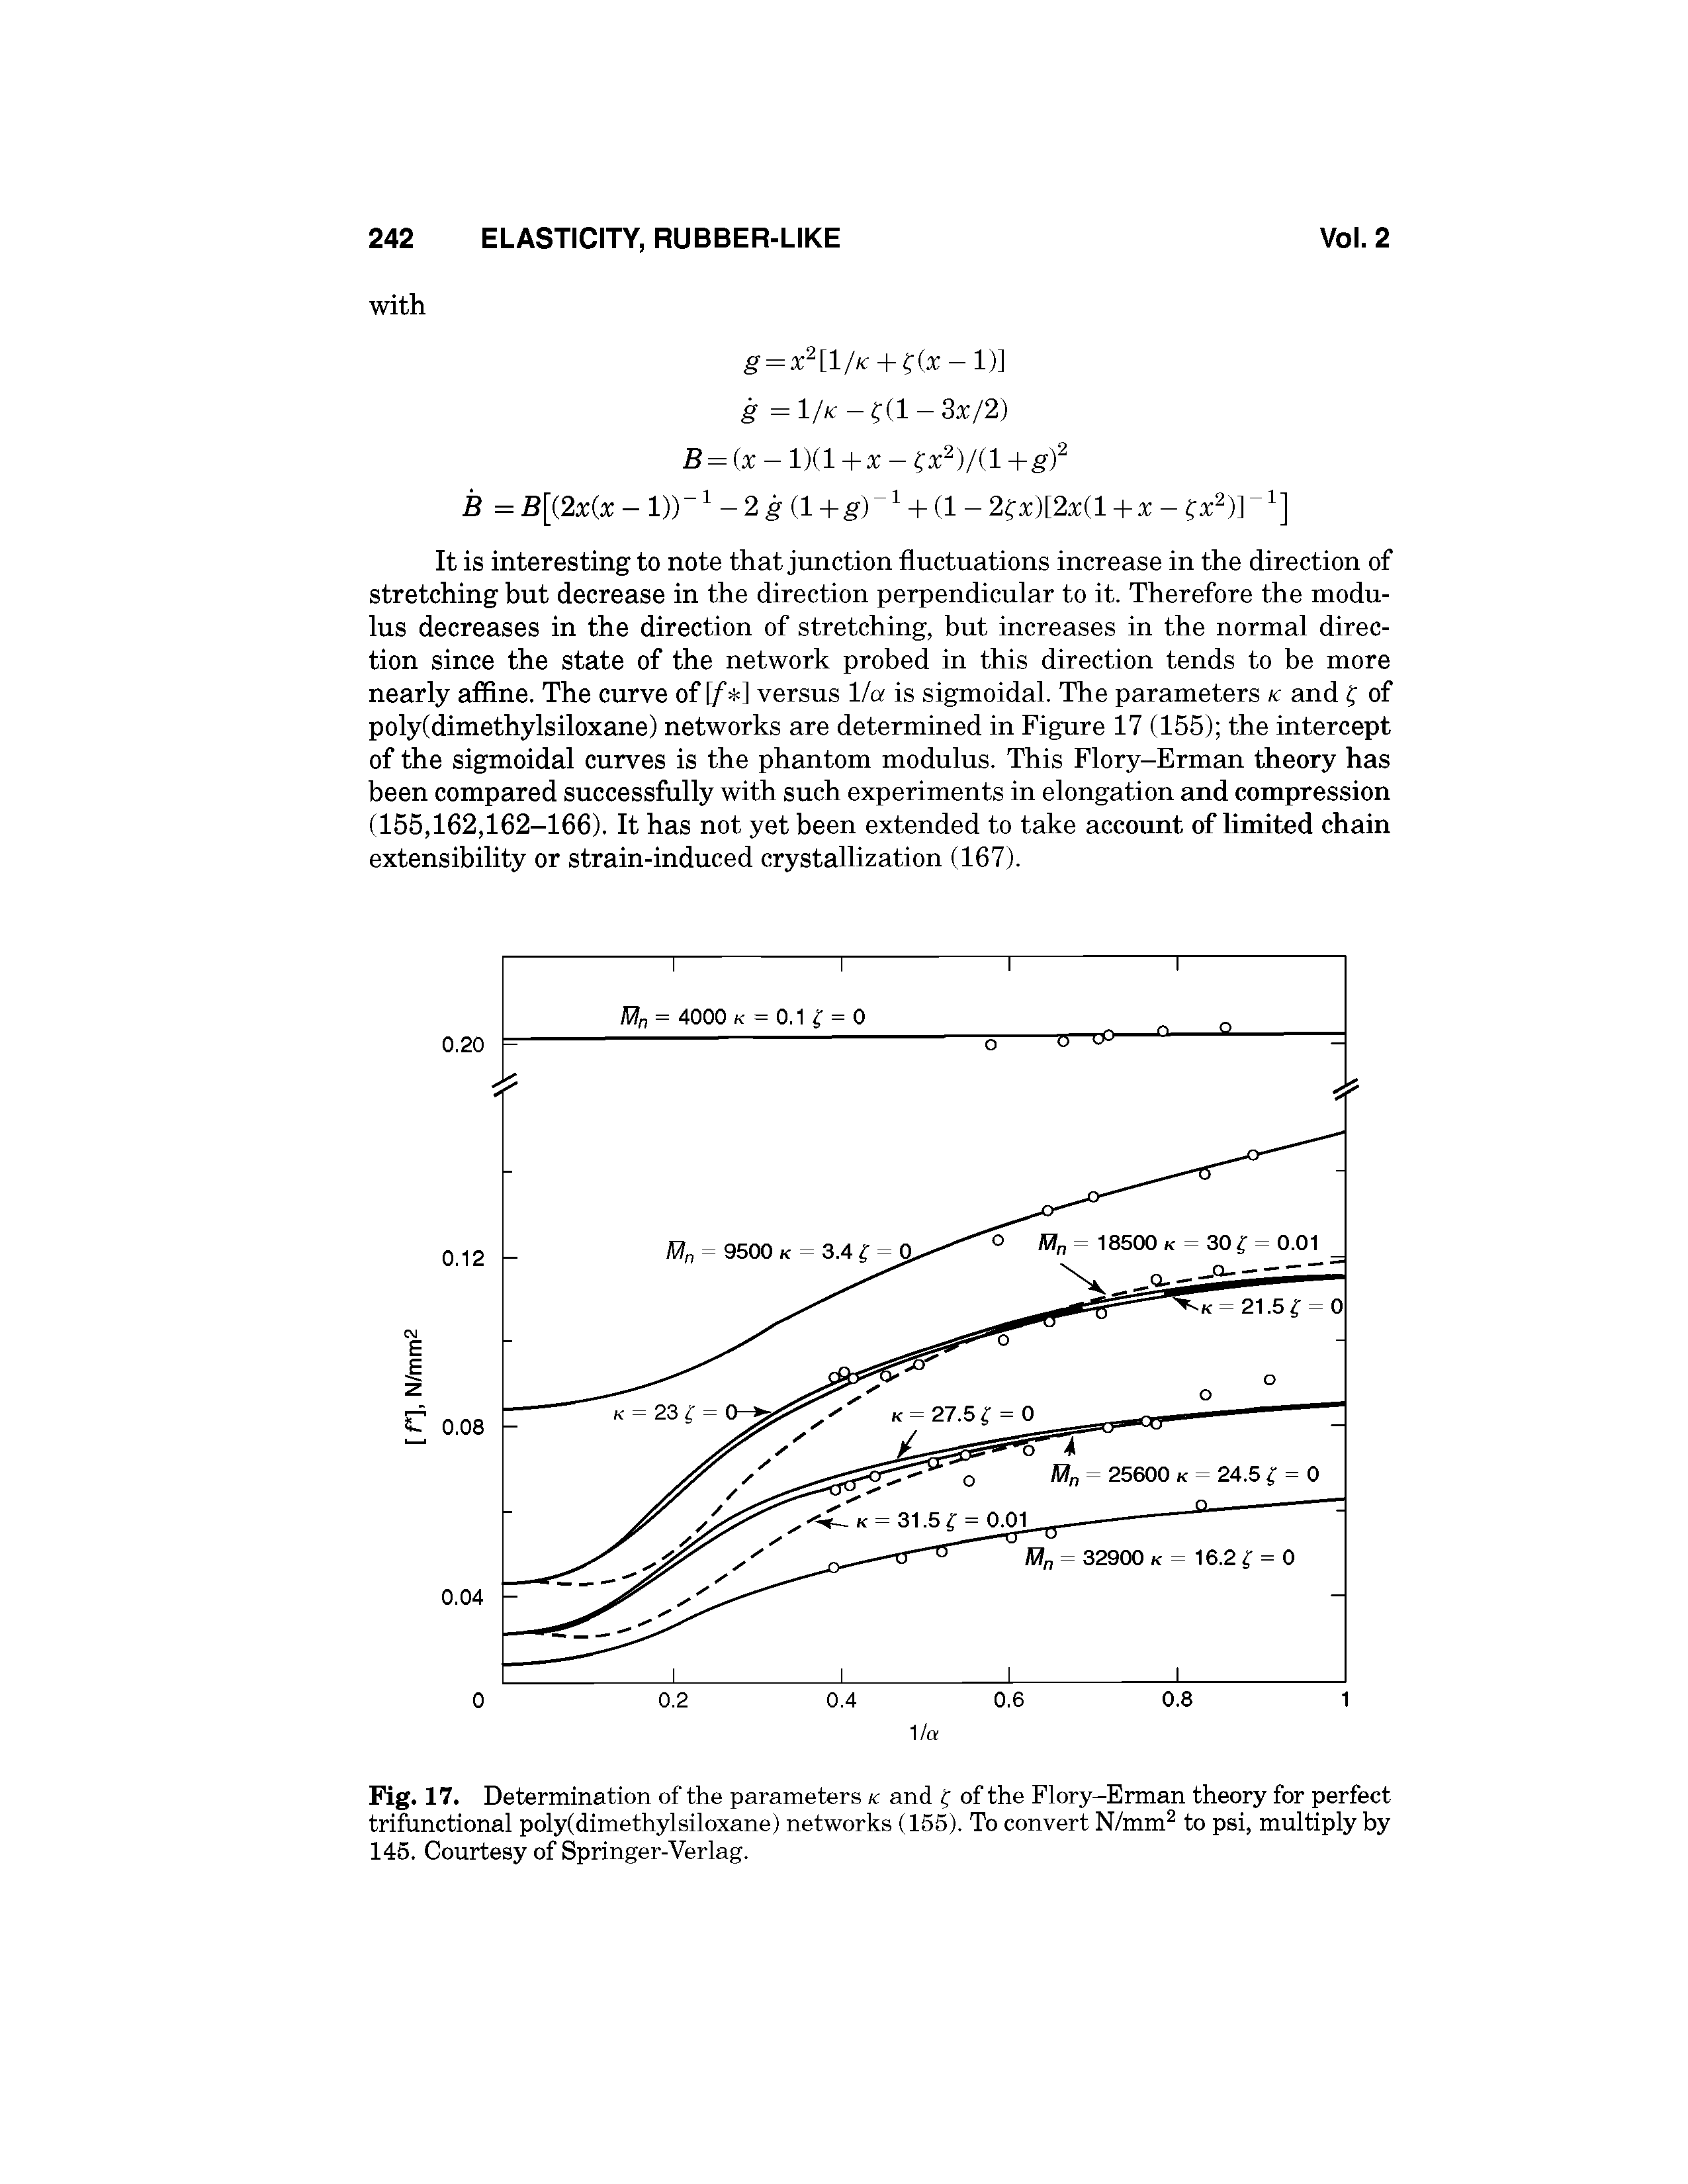 Fig. 17. Determination of the parameters k and of the Flory-Erman theory for perfect trifunctional poly(dimethylsiloxane) networks (155). To convert N/mm to psi, multiply by 145. Courtesy of Springer-Verlag.